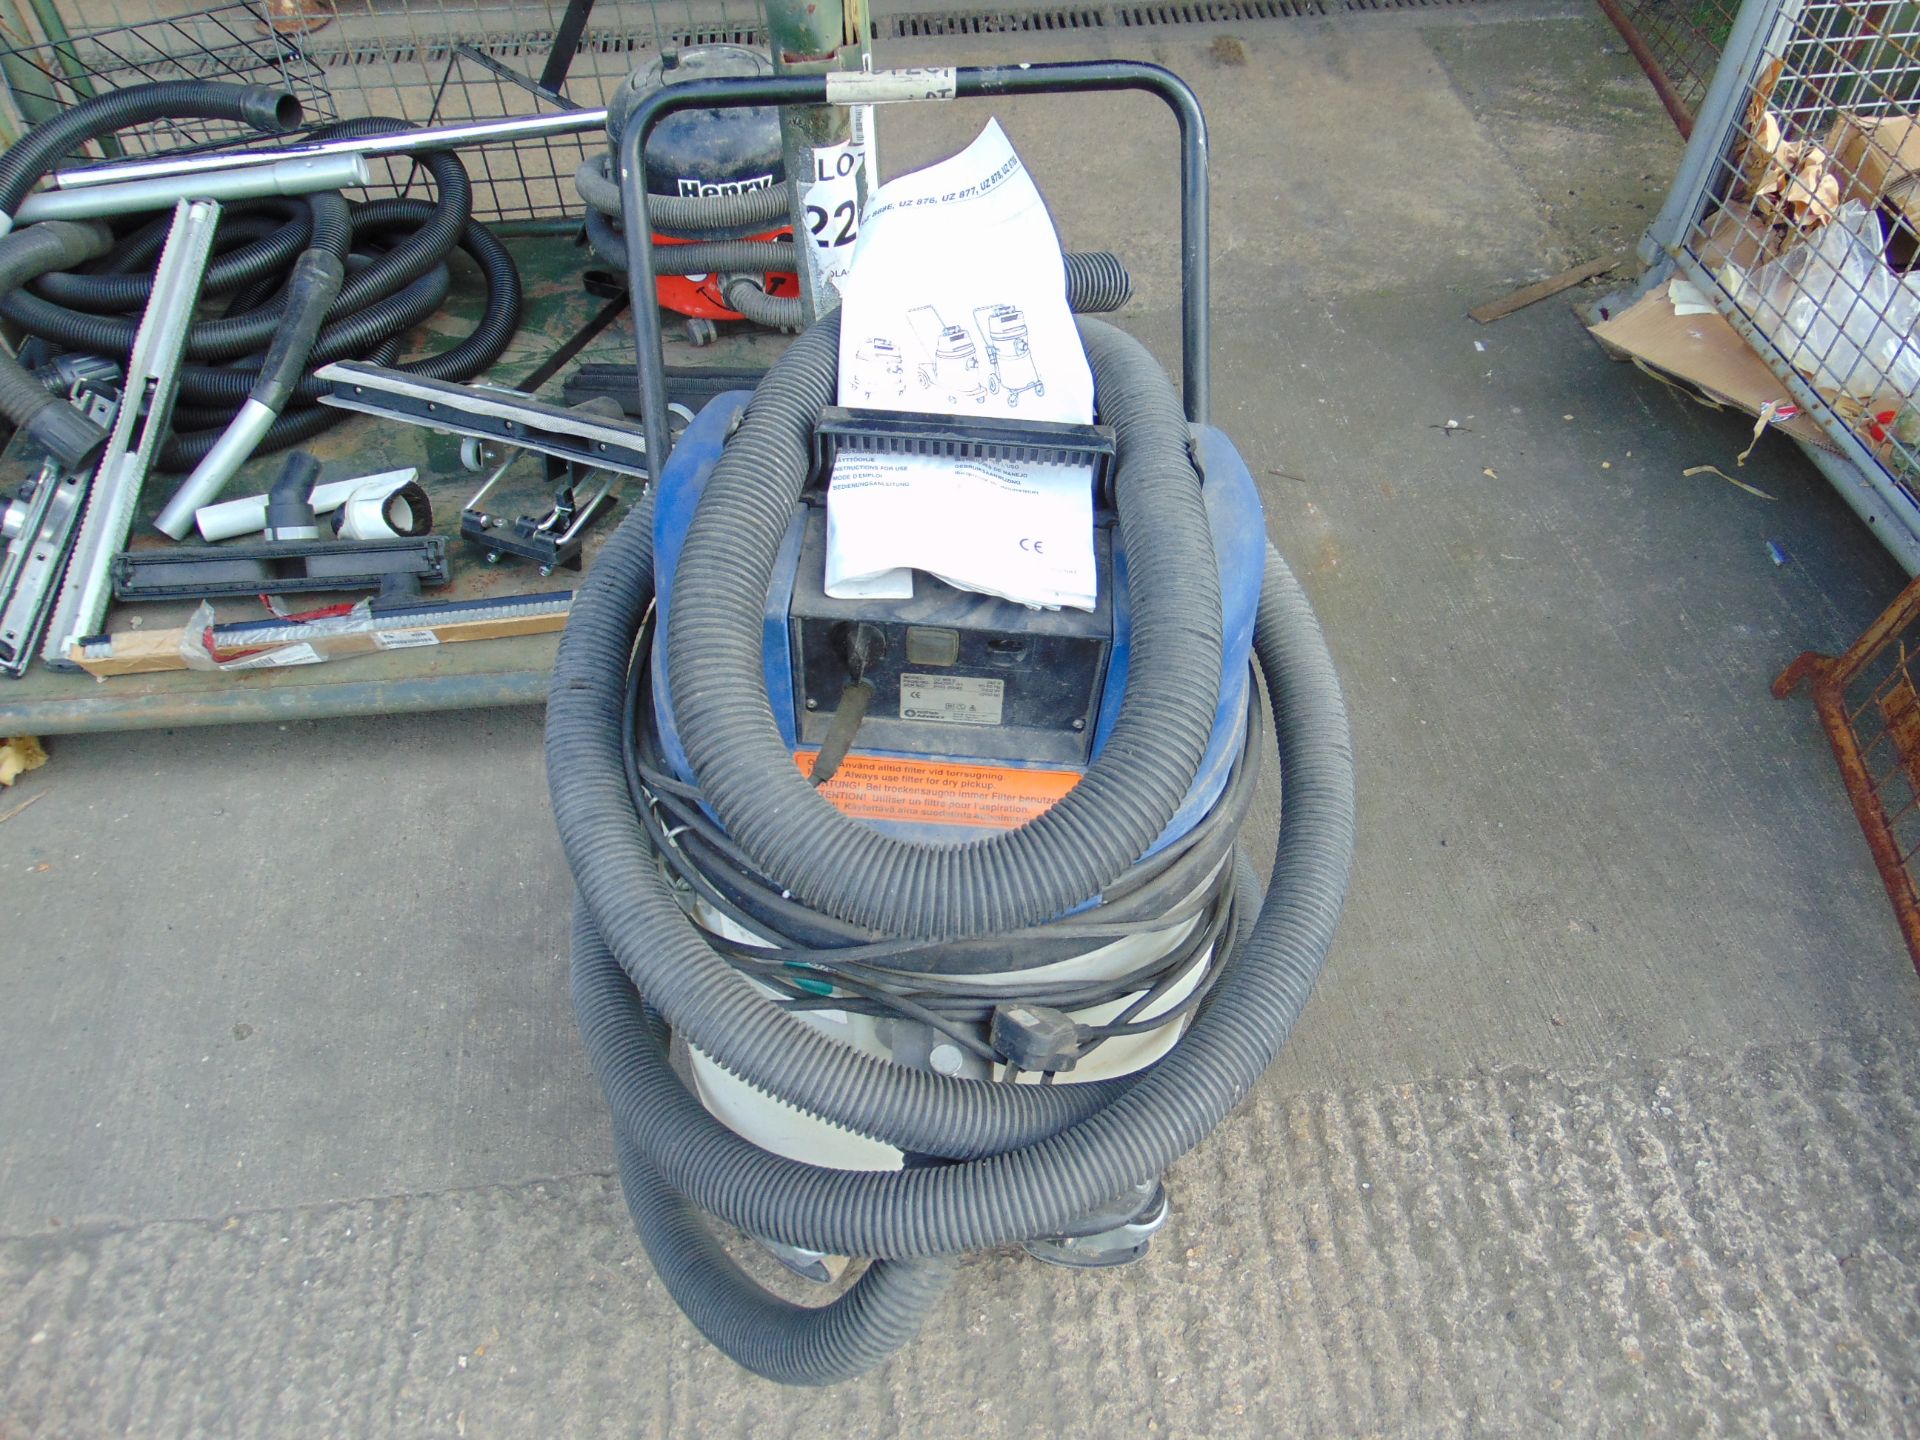 1 x Euroclean Shop Vacuum & Henry Vacuum w/ Trolley, Piping, Various Attachments etc. - Image 4 of 11